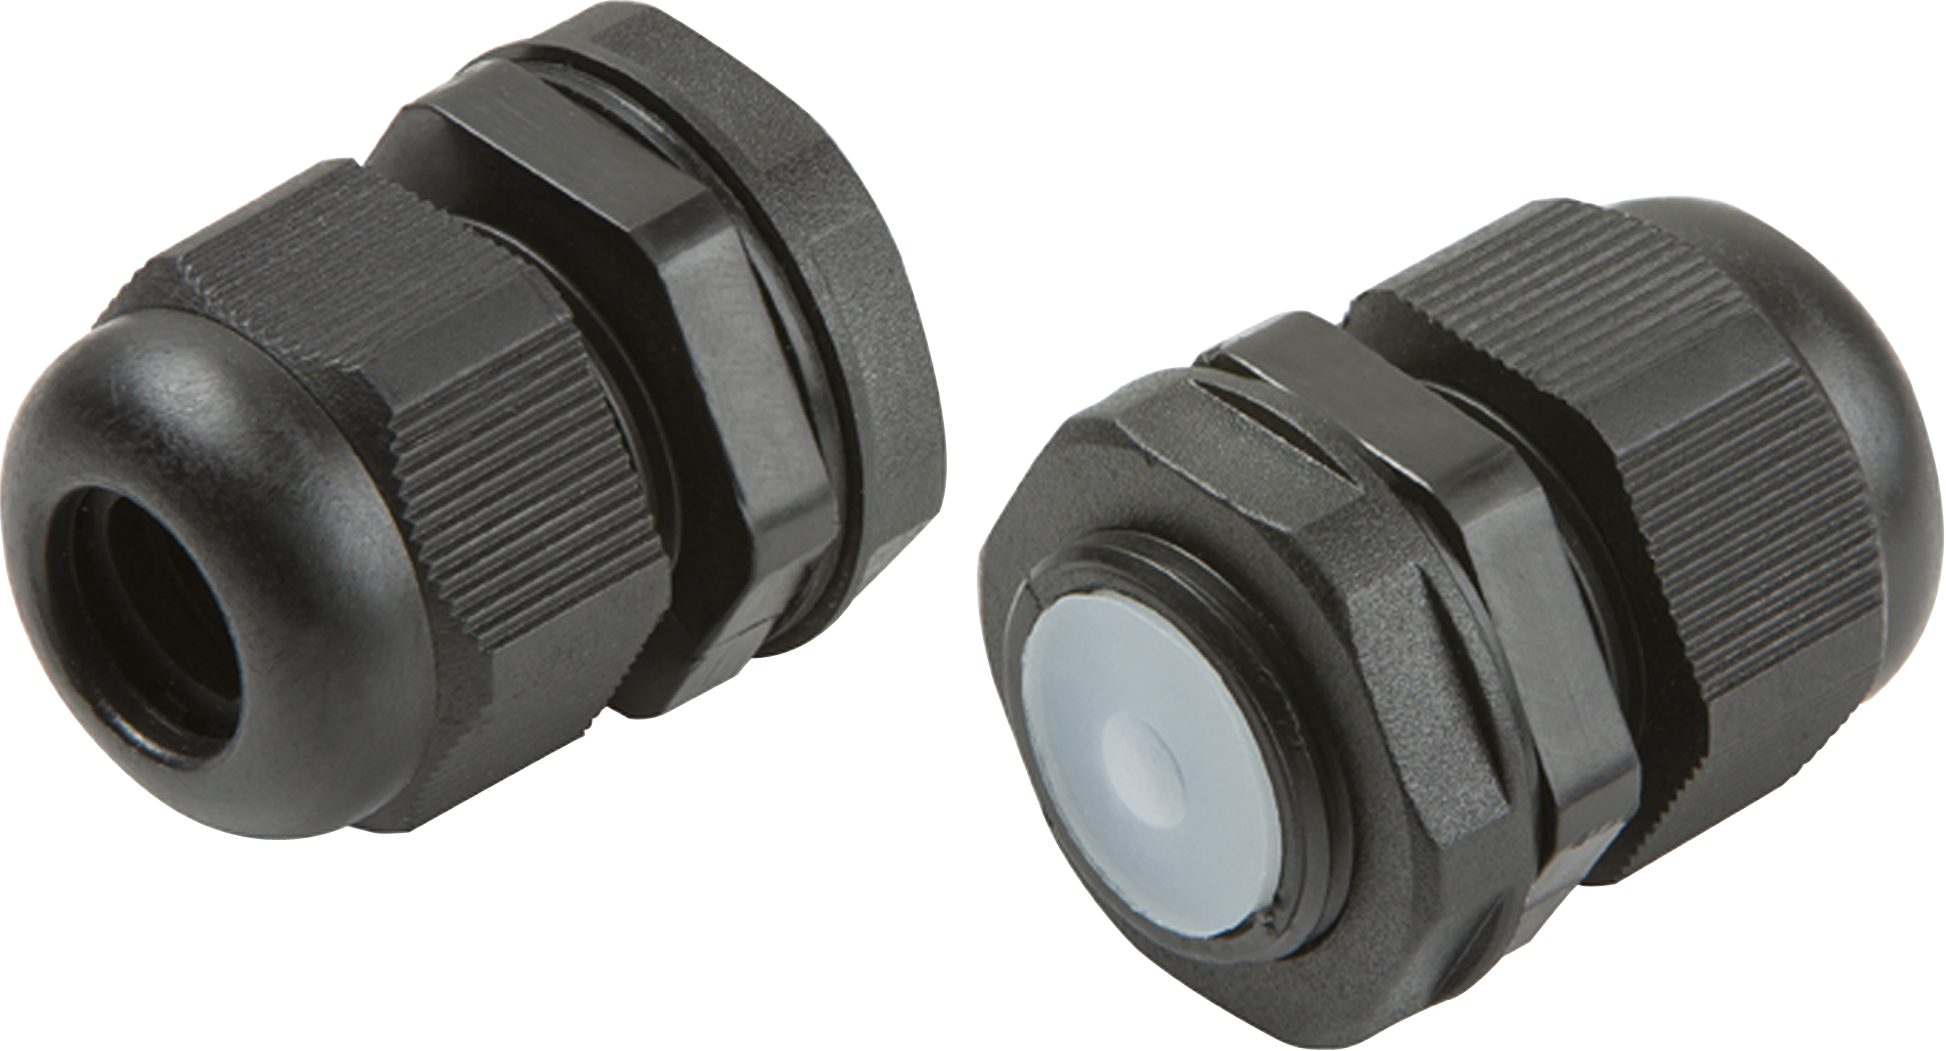 IP66 20mm Cable Glands - JB006 